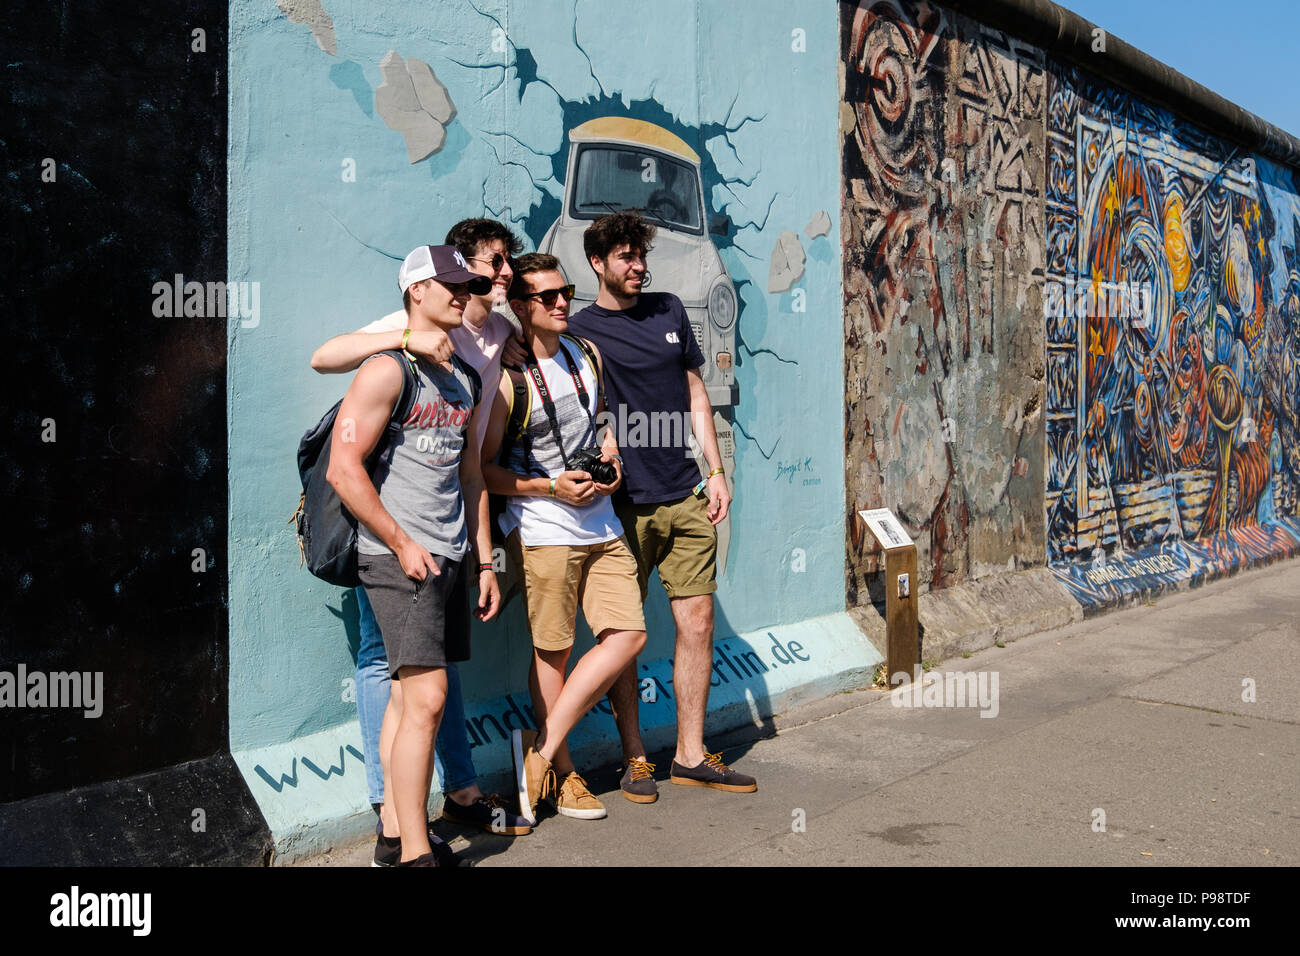 Berlin, Germany - july 2018: Group of young men taking group picture at  Berlin Wall / East Side Gallery in Berlin Stock Photo